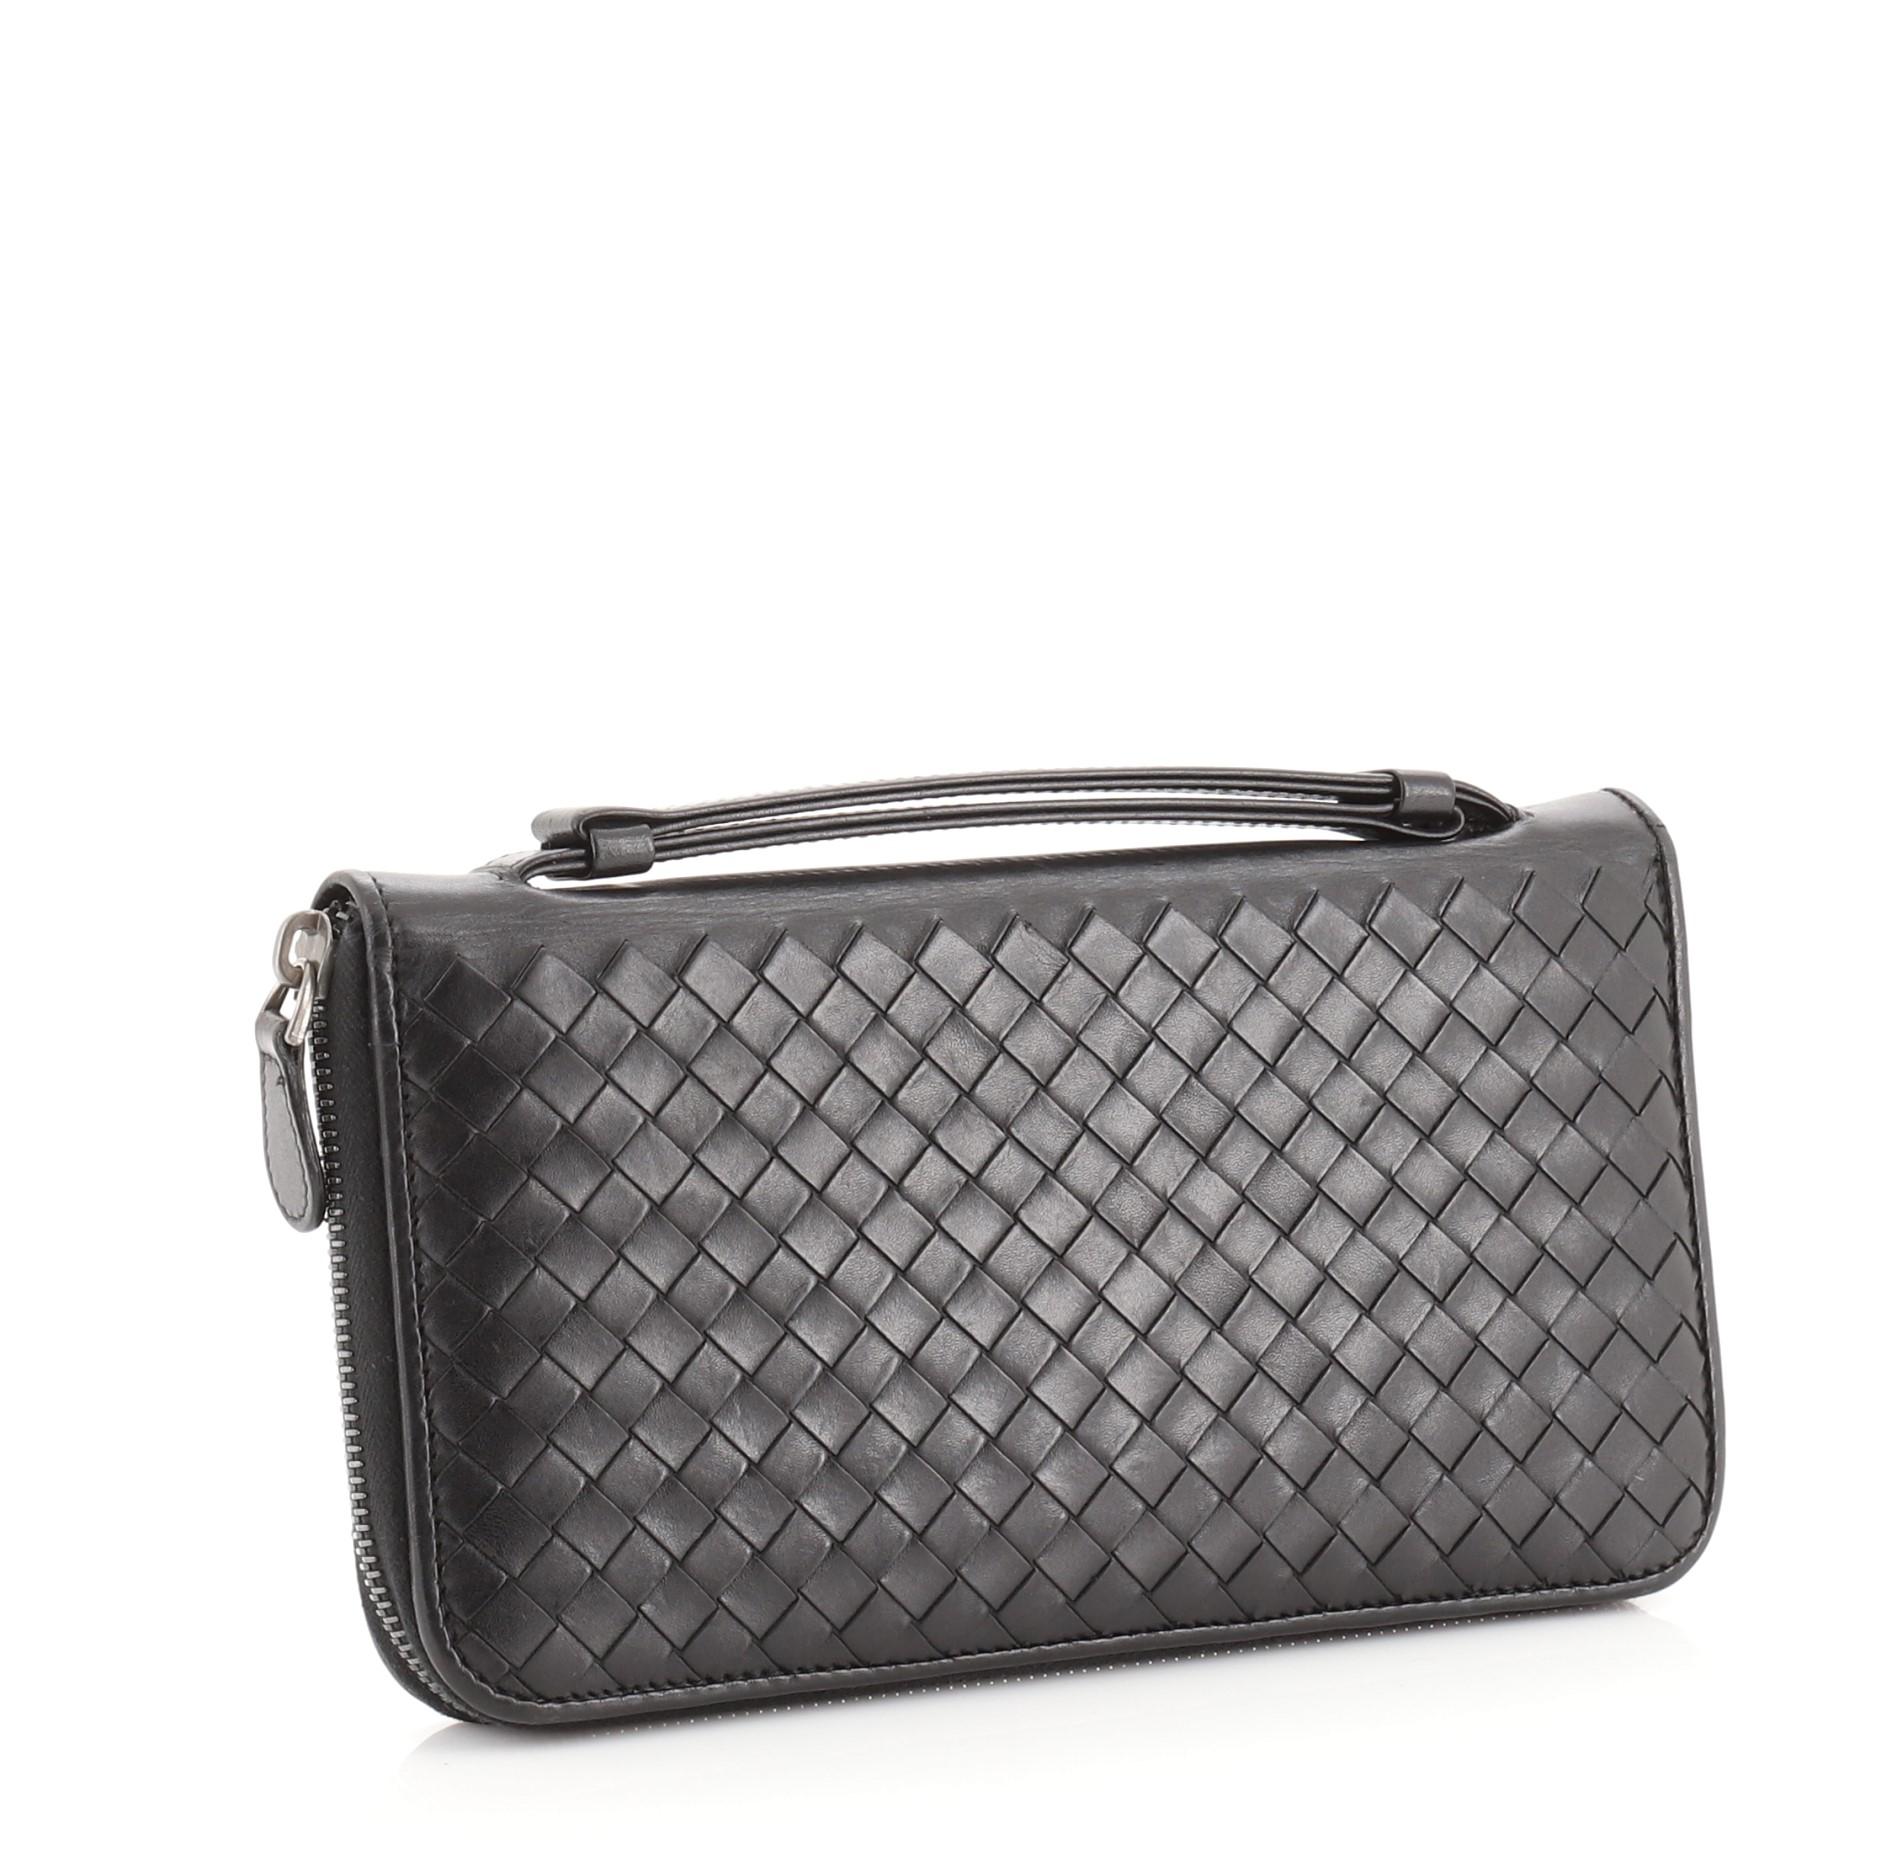 Bottega Veneta Travel Organizer Intrecciato Nappa
Black

Condition Details: Moderate wear and scuffs on exterior and in interior, cracking and peeling on zipper pull wax edges. Indentations in interior, scratches and discoloration on